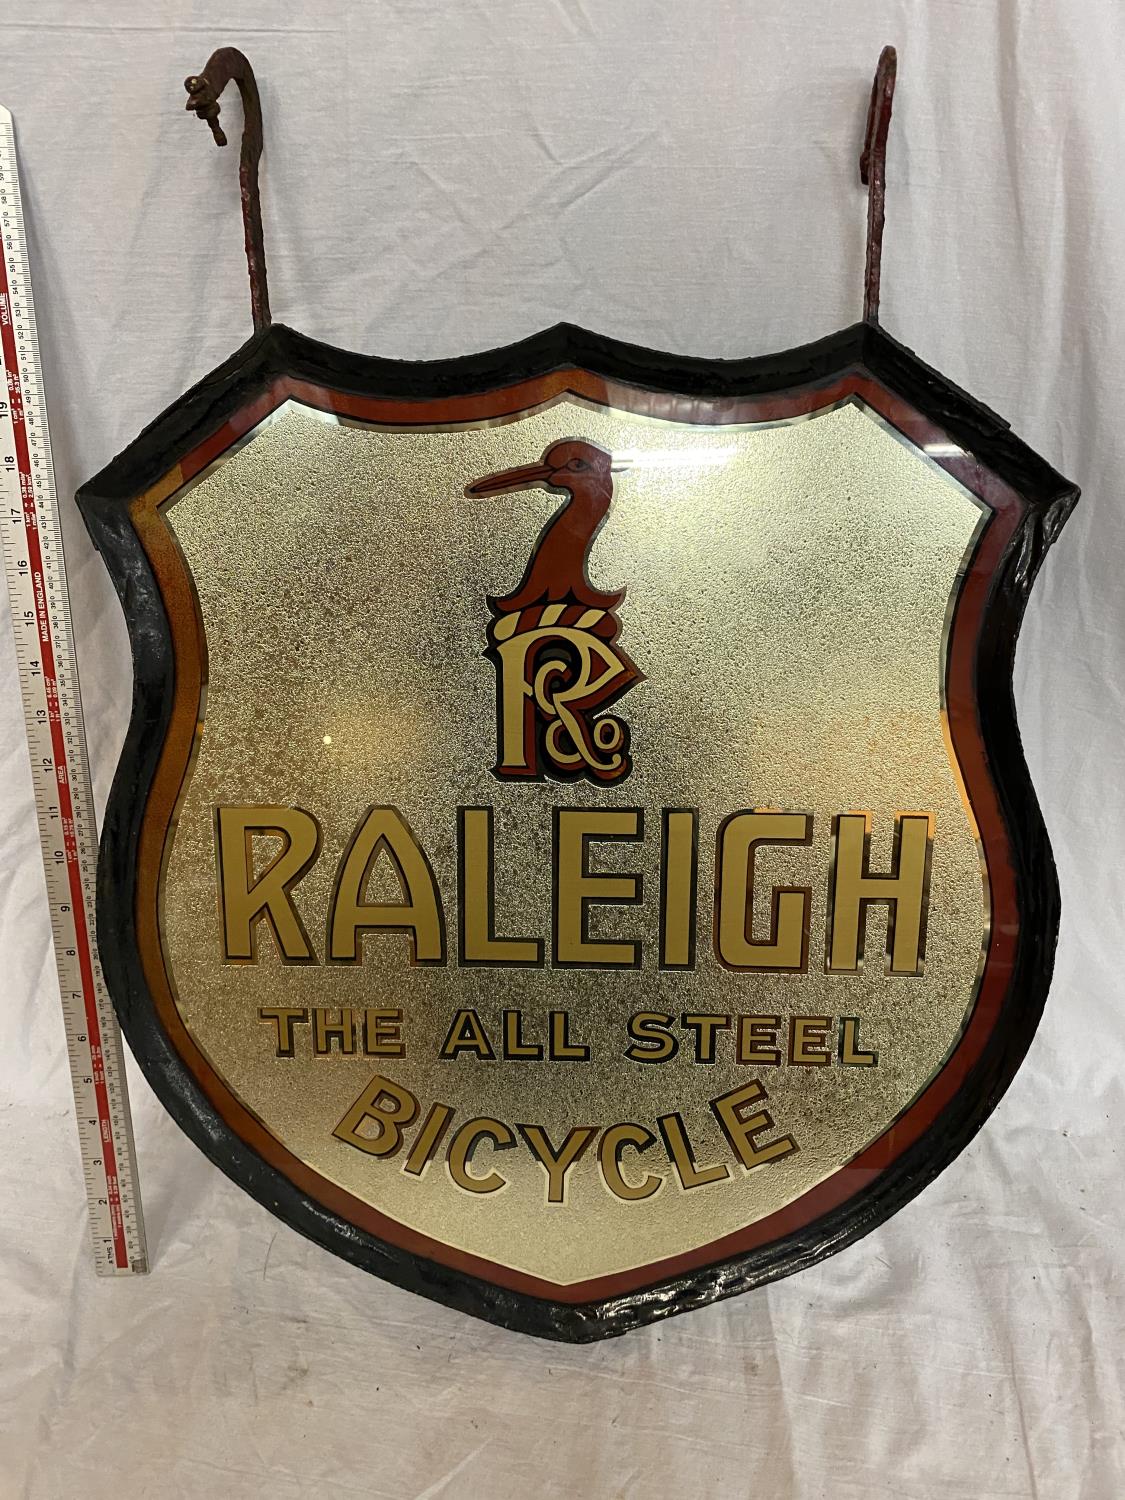 A VINTAGE GLASS AND MIRRORED "RALEIGH, THE ALL STEEL BICYCLE" DOUBLE SIDED ADVERTISING SIGN IN RED - Image 3 of 5